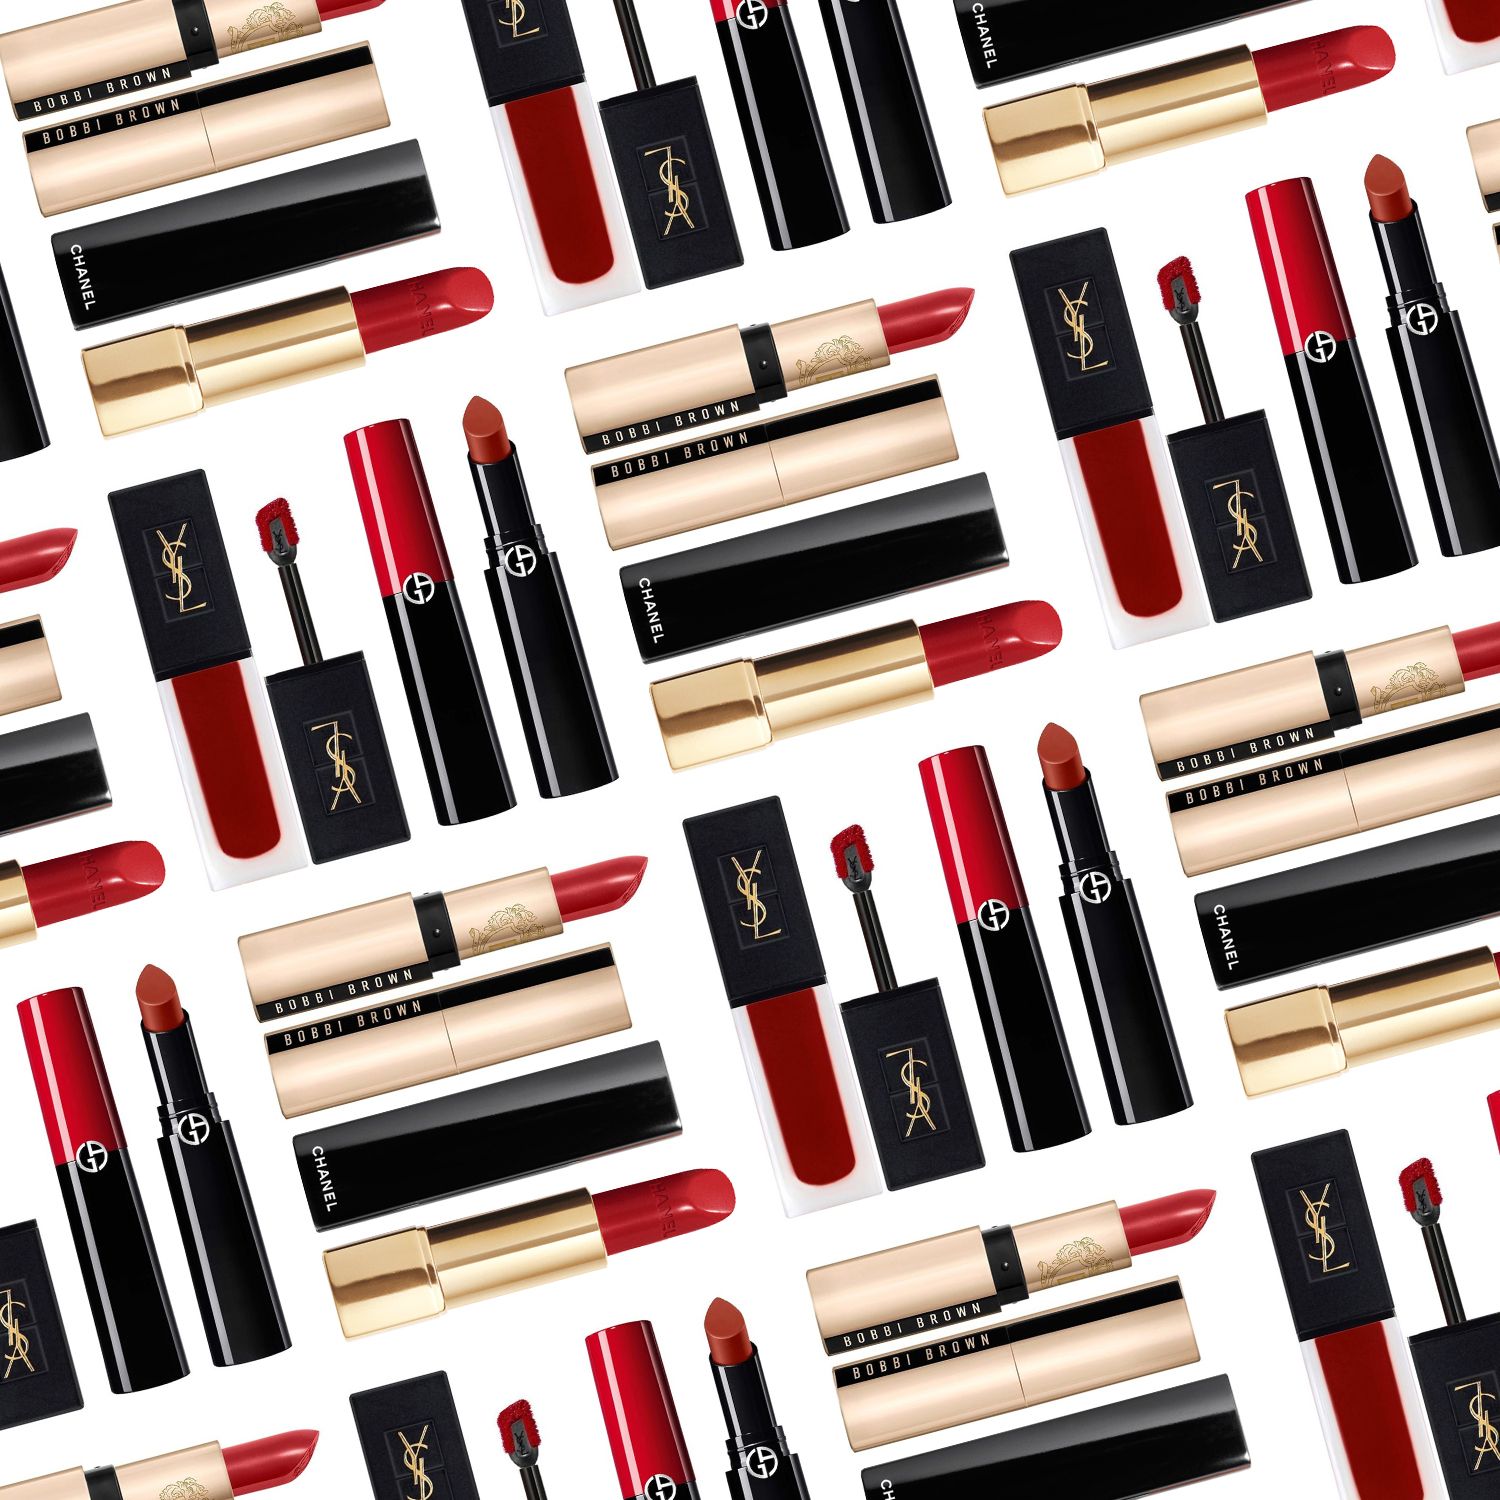 Classic Red Lipstick Shades That Will Never Go Out of Style